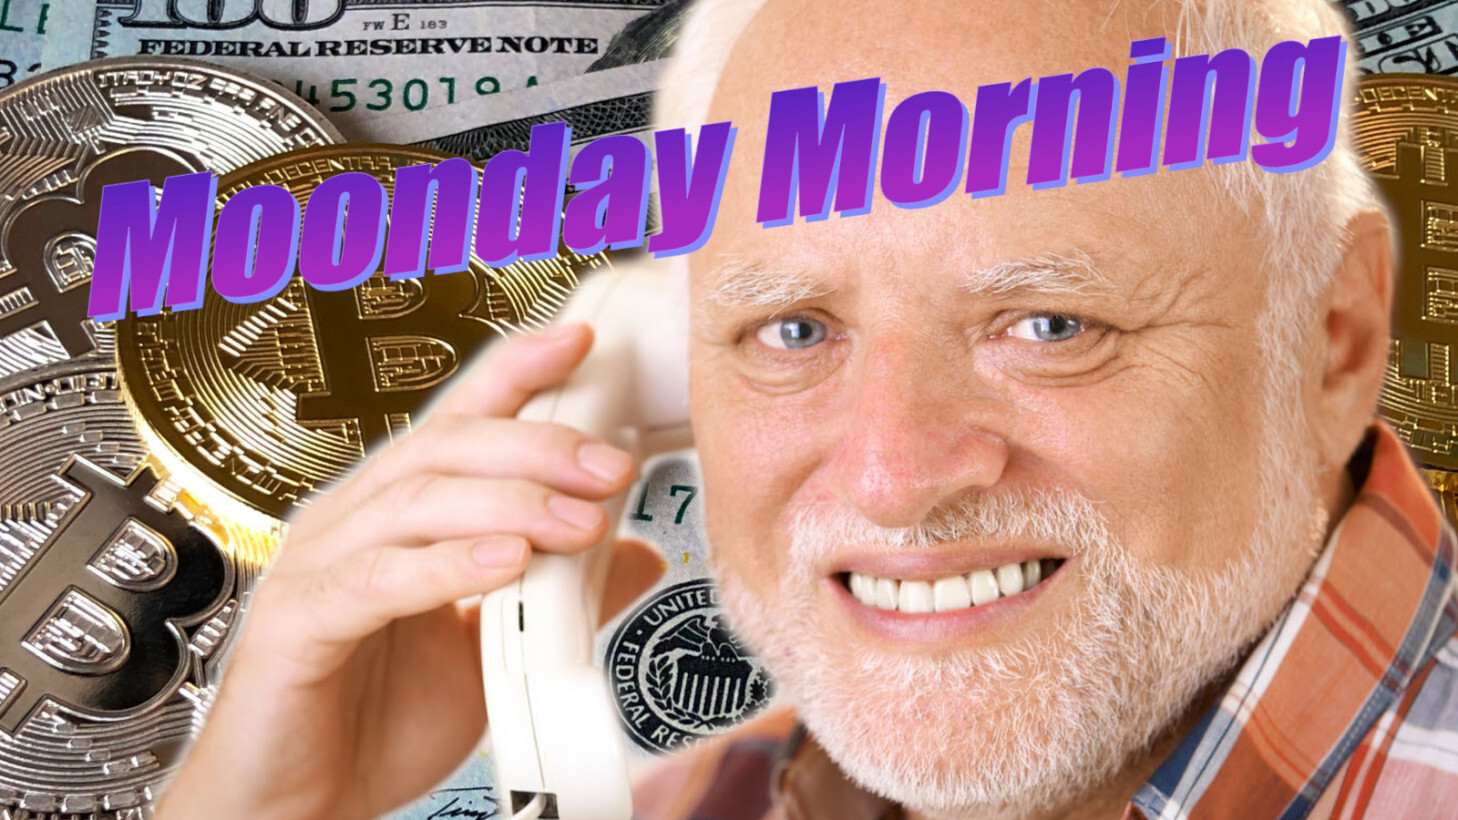 Moonday Mornings: Bitcoin flash-crashed to $75, SIM-swapping on the rise, and more